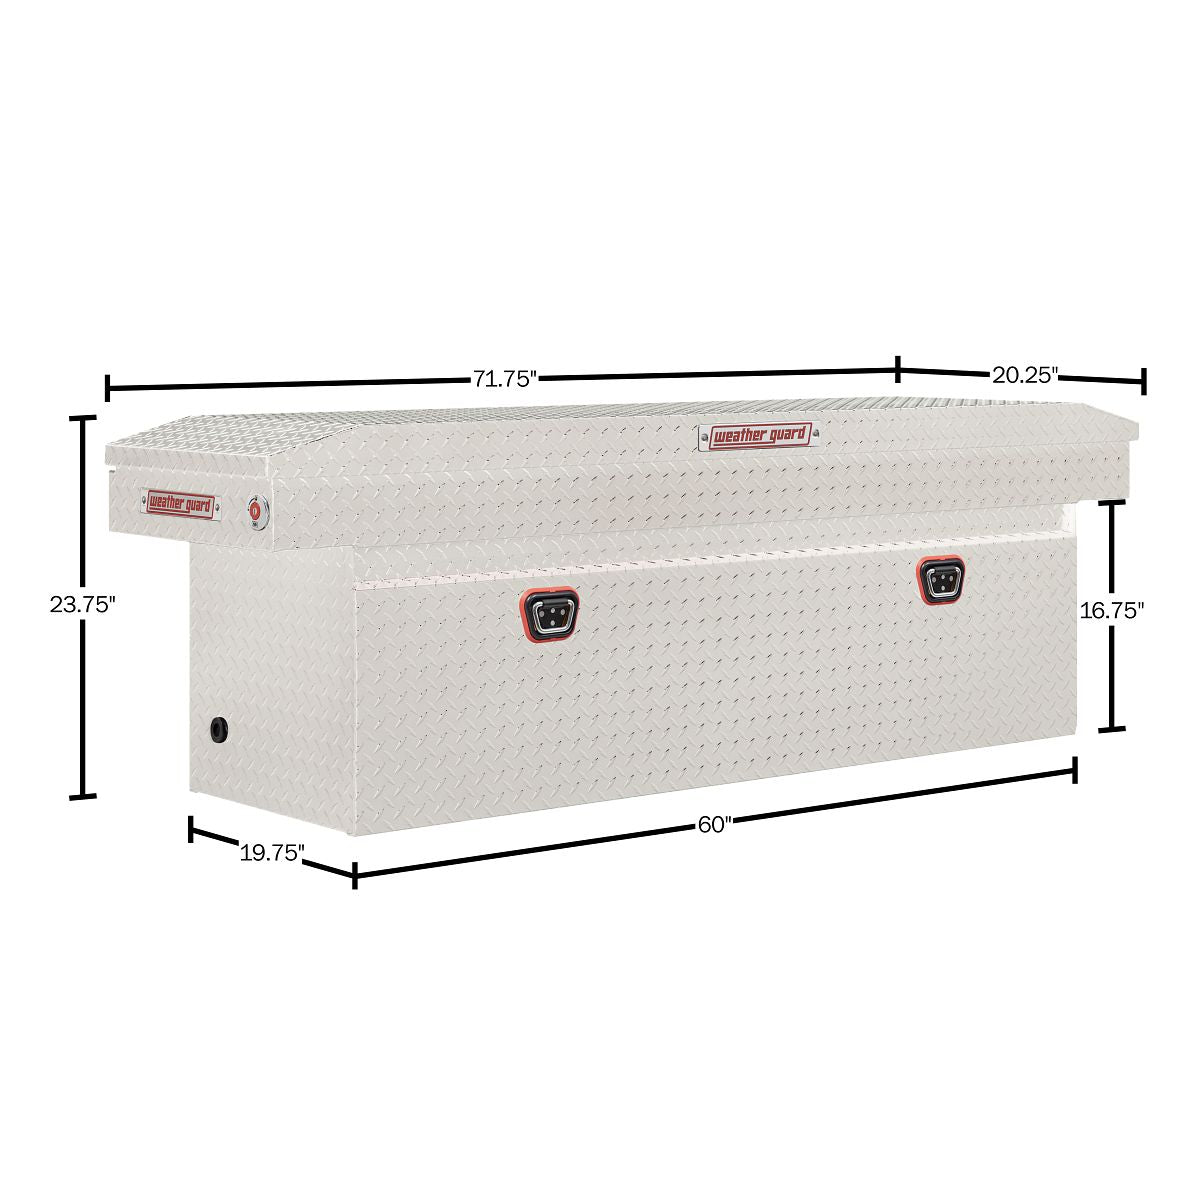 Weather Guard Crossover Toolbox Bright Aluminum Full Size Deep Model (123-0-03)